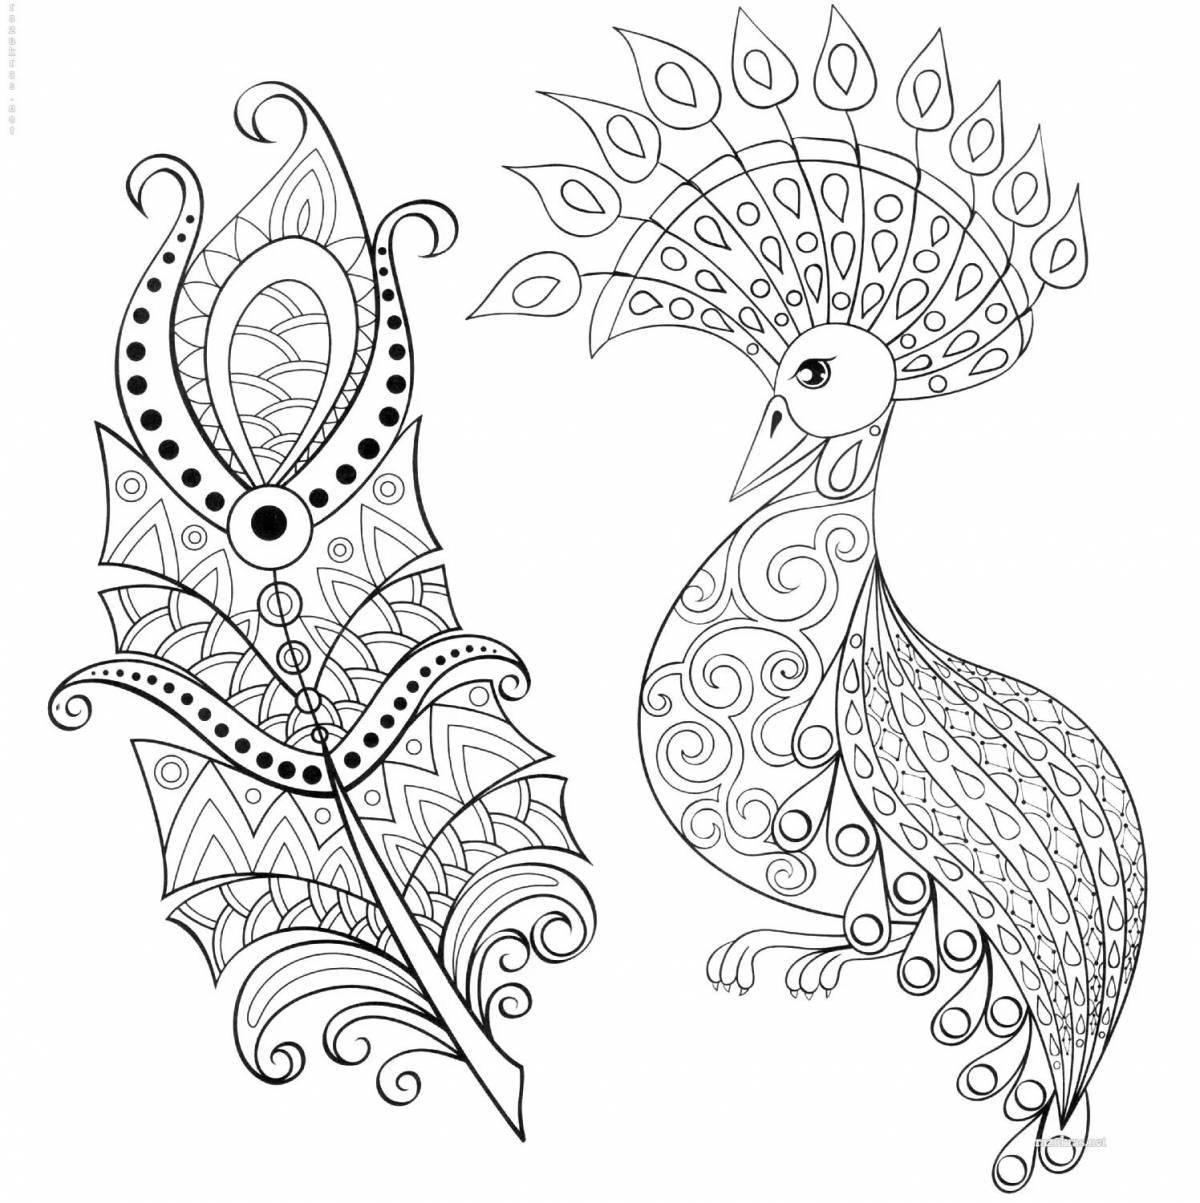 Glorious peacock feather coloring page